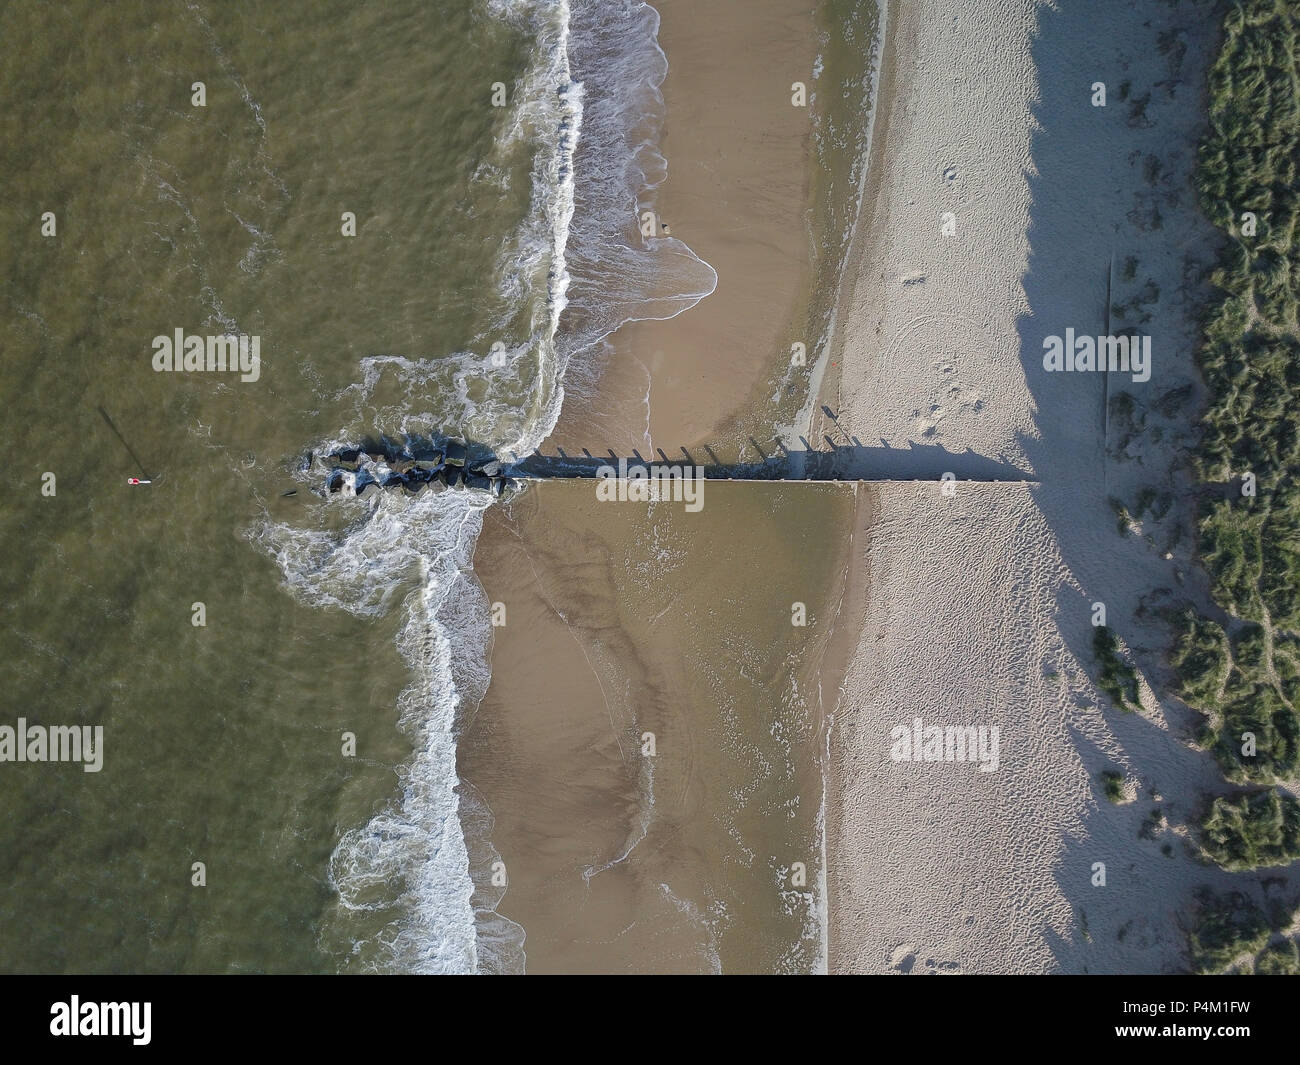 Aerial view of a groyne on a beach in the UK Stock Photo